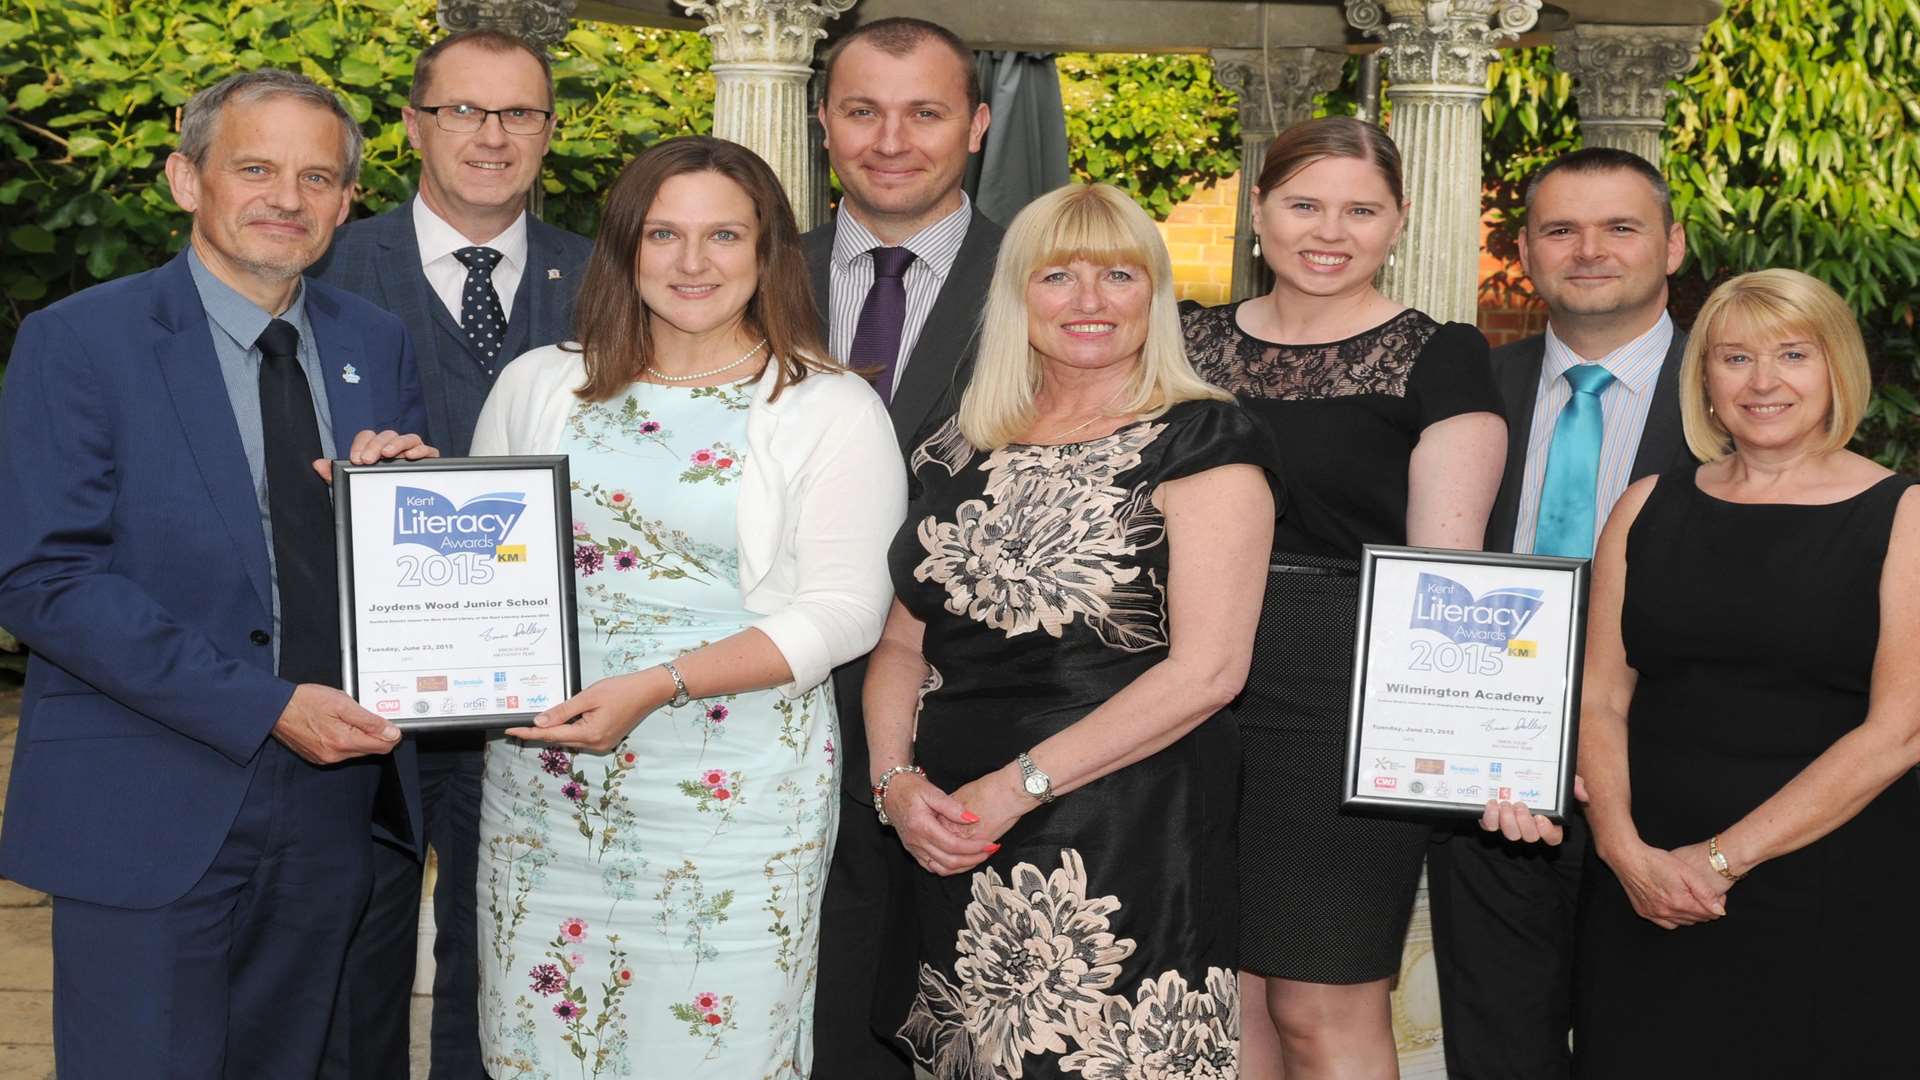 Staff from Joydens Wood Junior School and Wilmington Academy celebrate their Kent Literacy Awards wins in 2015. The 2016 nominations remain open until noon on Friday, April 29.